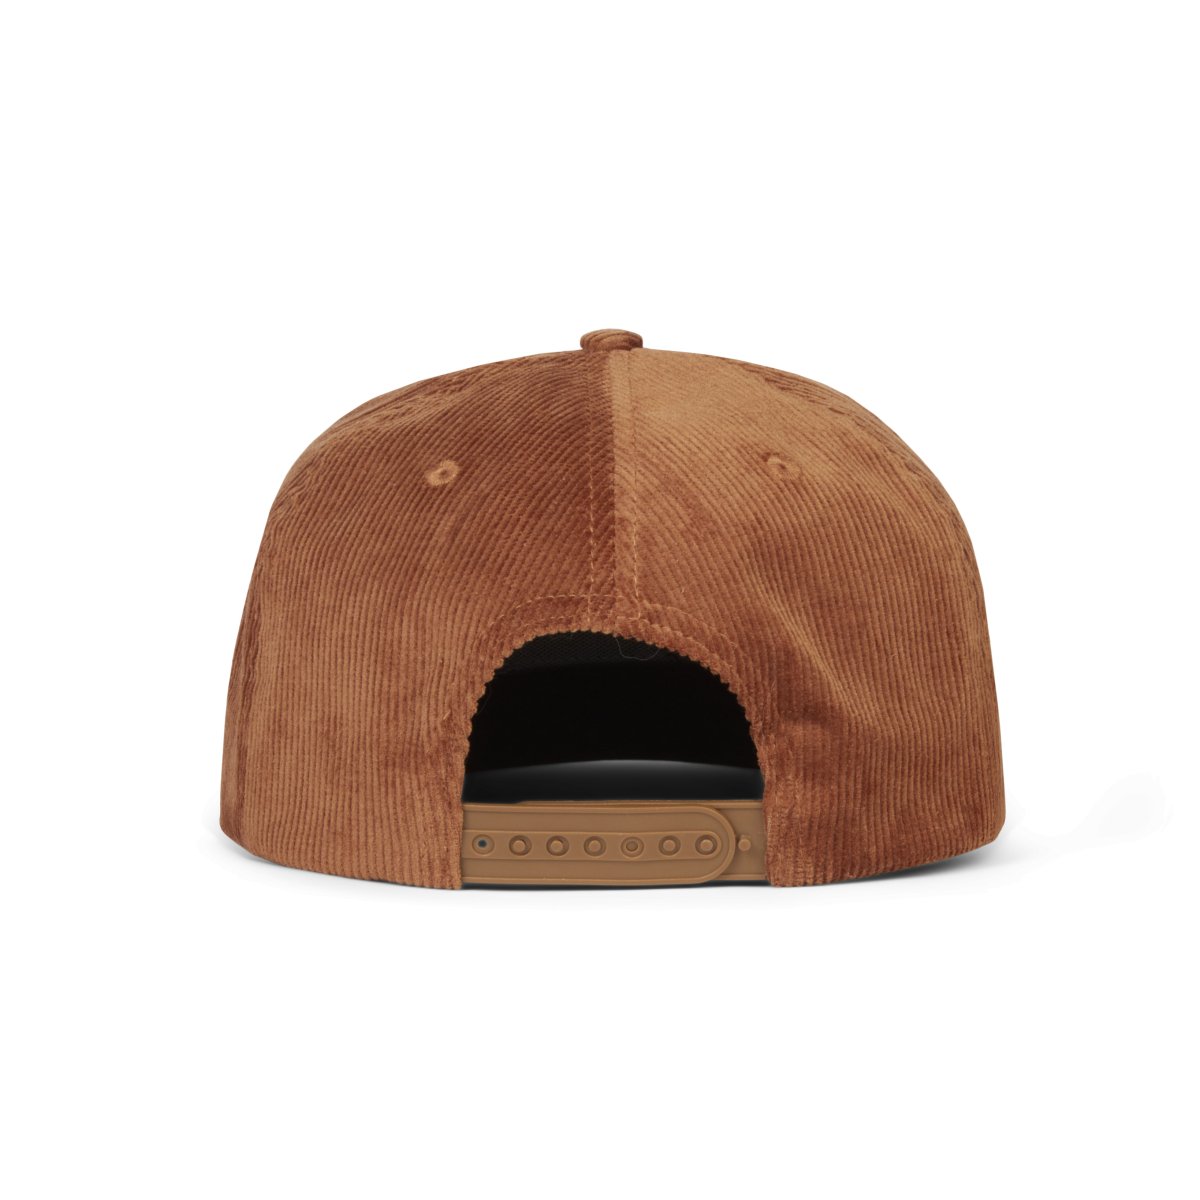 Tan Corduroy Rope Hat - Roosevelt Supply Co.